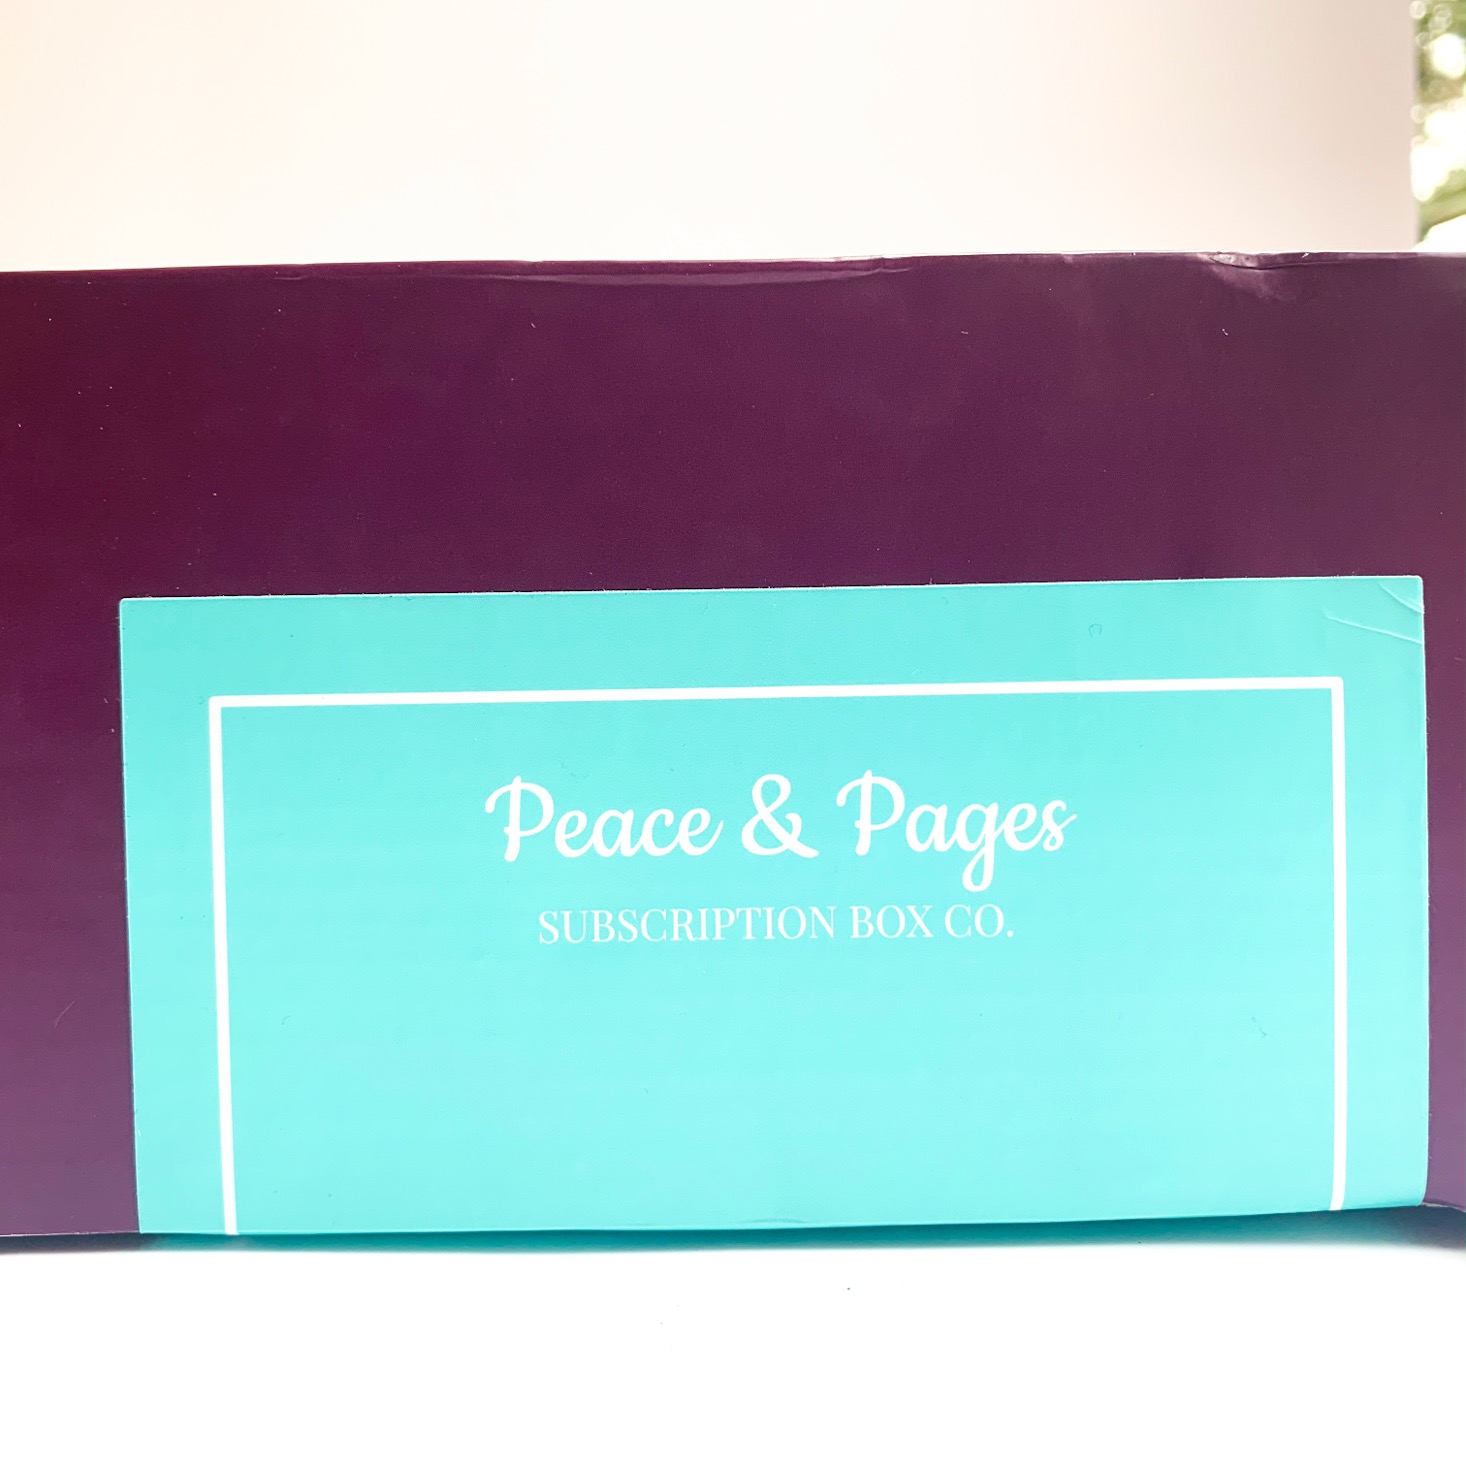 Peace & Pages Deluxe Box Review + Coupon – Drama + Suspense